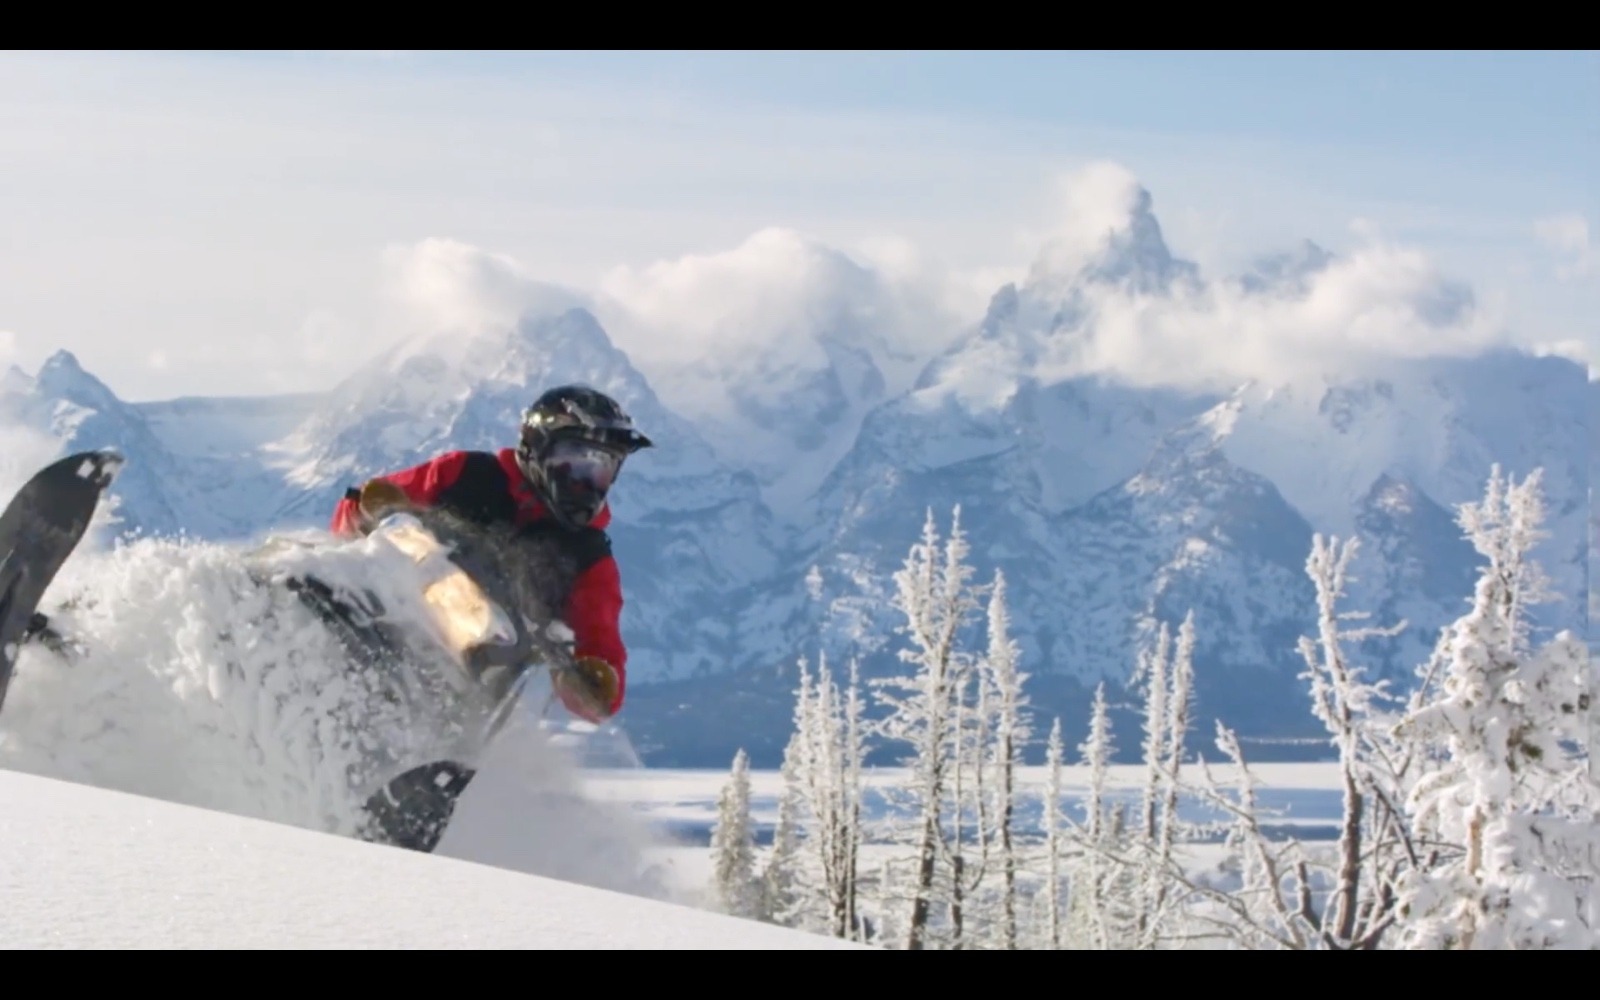 Still image taken from  Jackson Hole Travel &amp; Tourism Board's YouTube video &quot;Jackson Hole Winter 2017-18 : Stay Wild&quot;.